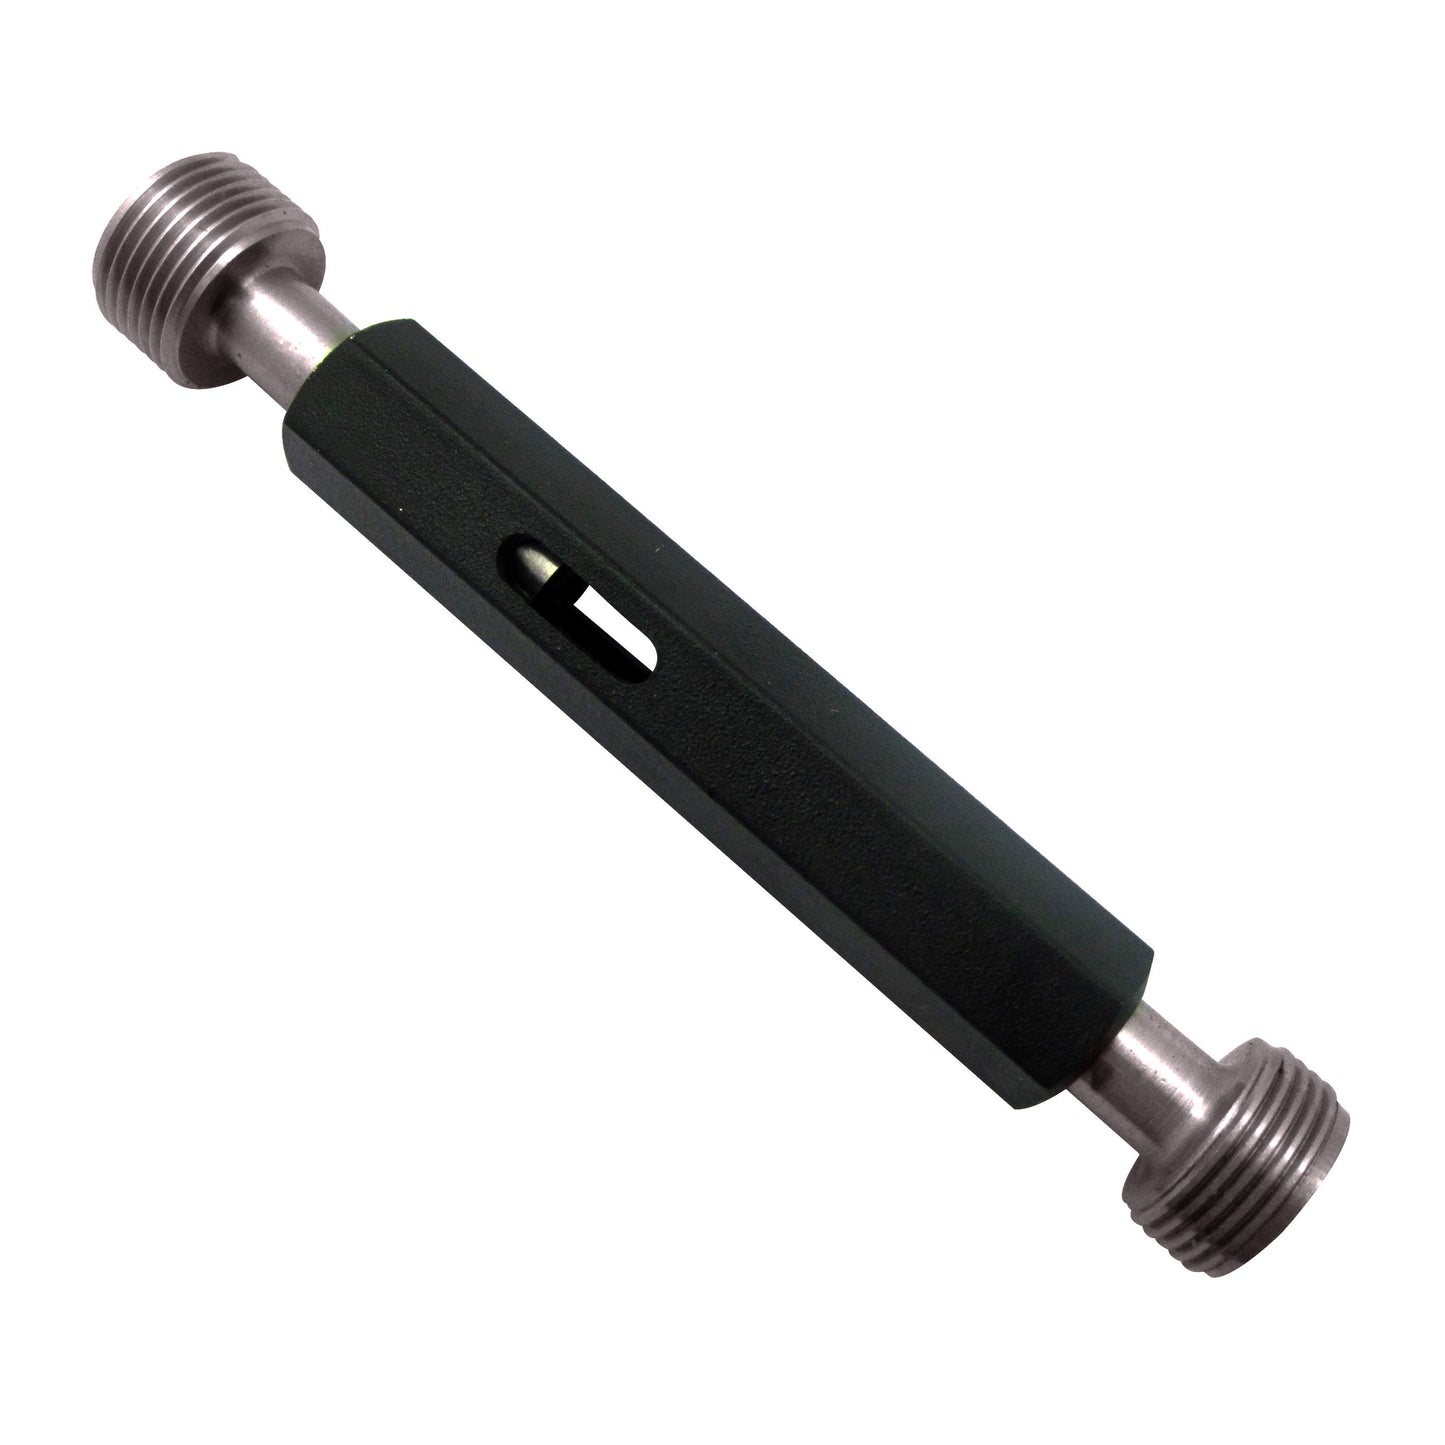 3/4" - 16 Unified Right Hand Thread Plug Gauge